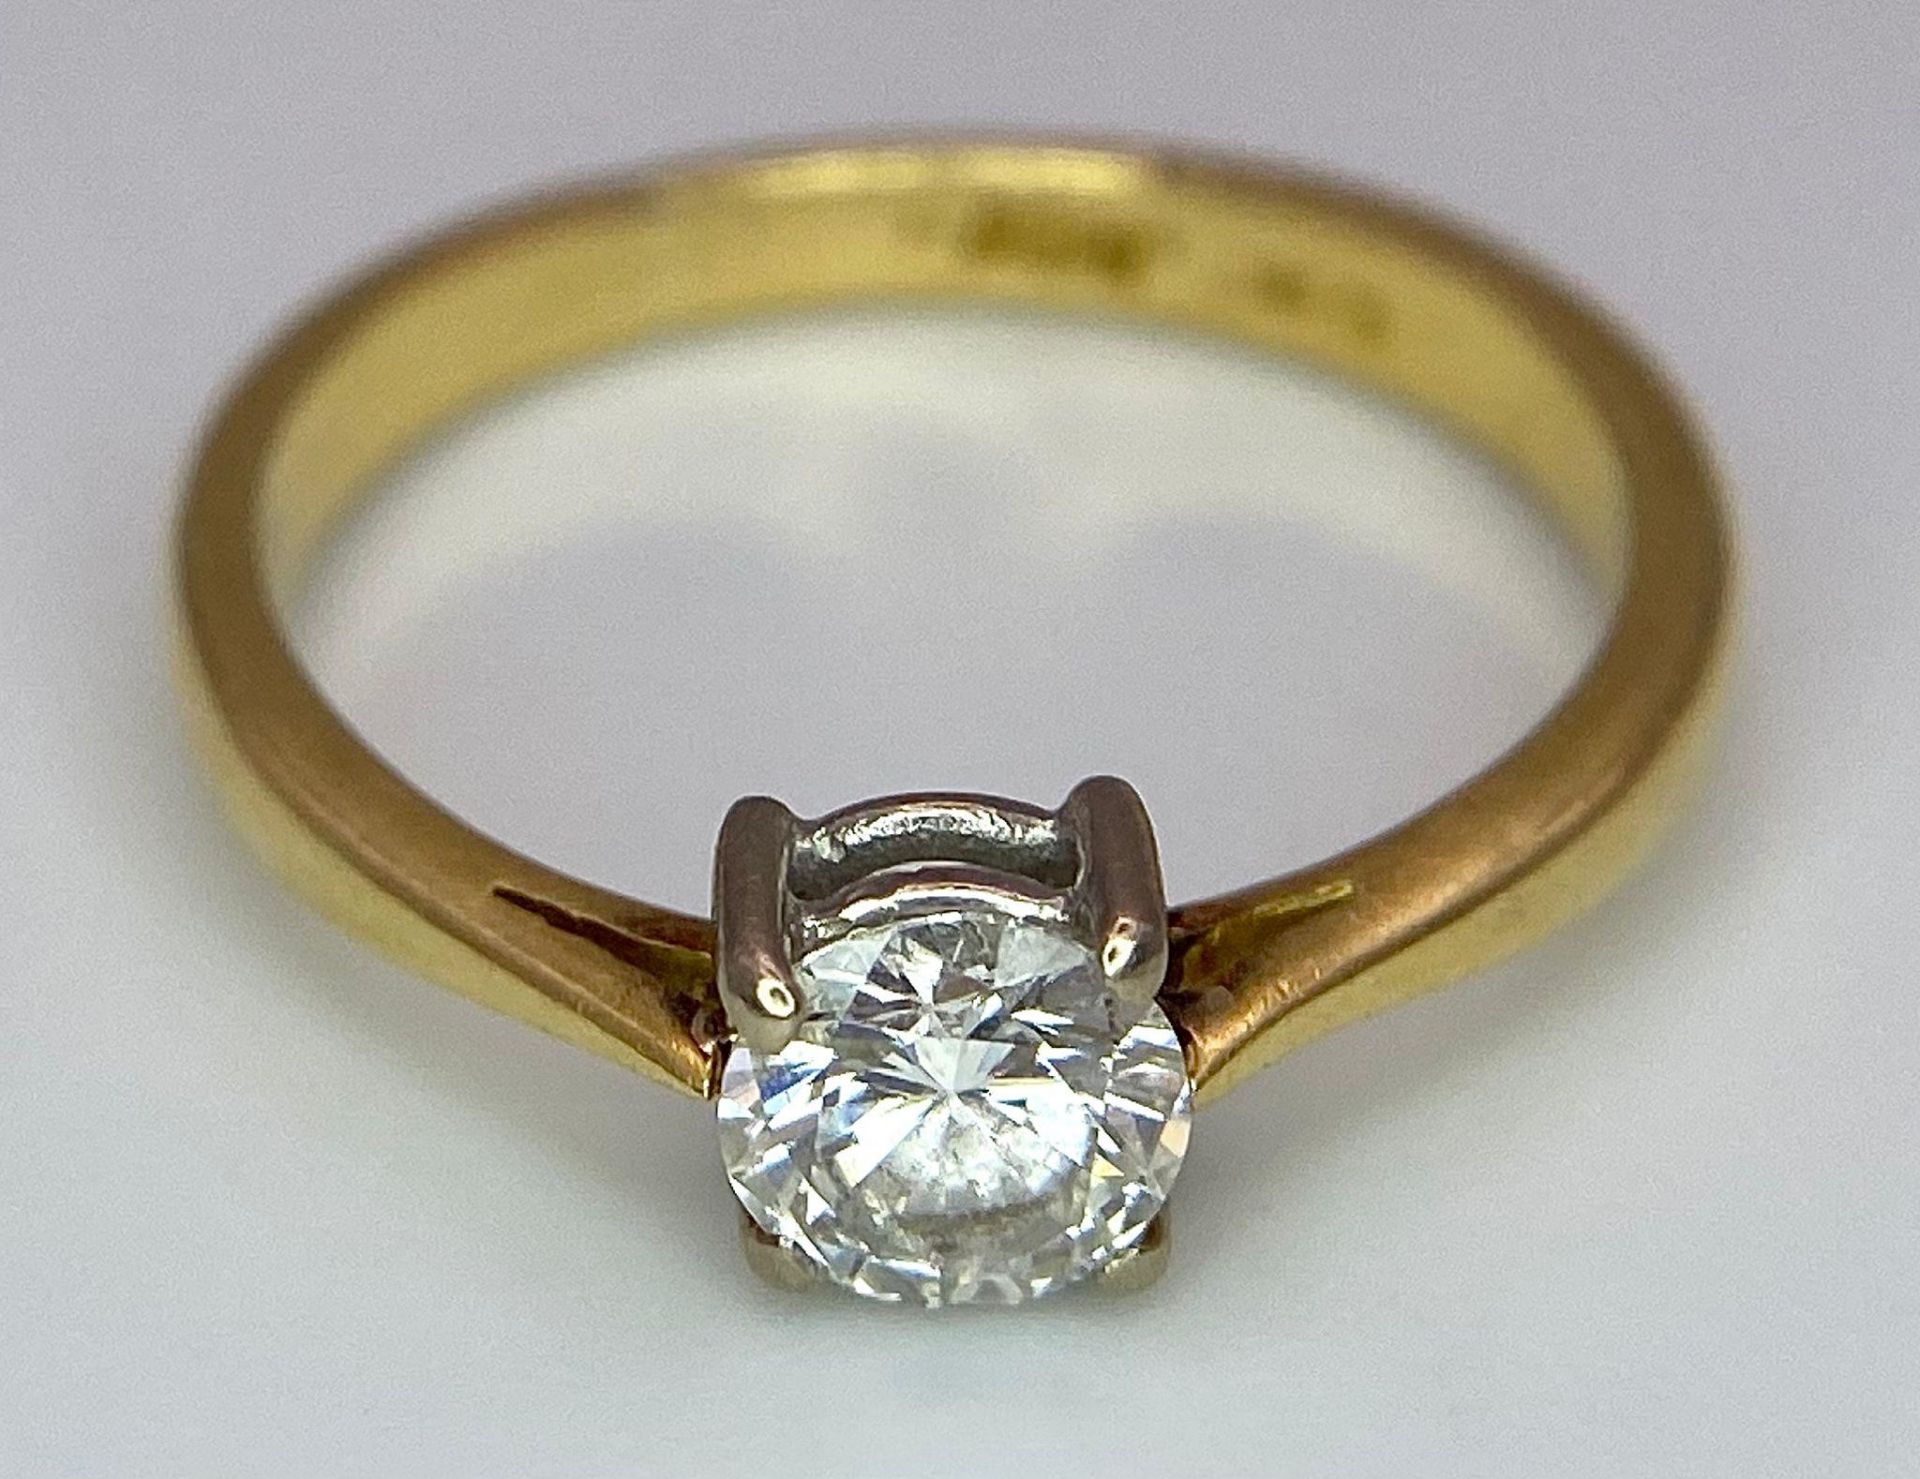 An 18K Yellow Gold Diamond Solitaire Ring. Brilliant round cut - 0.45ctw. 2.5g total weight. Size L. - Image 5 of 7